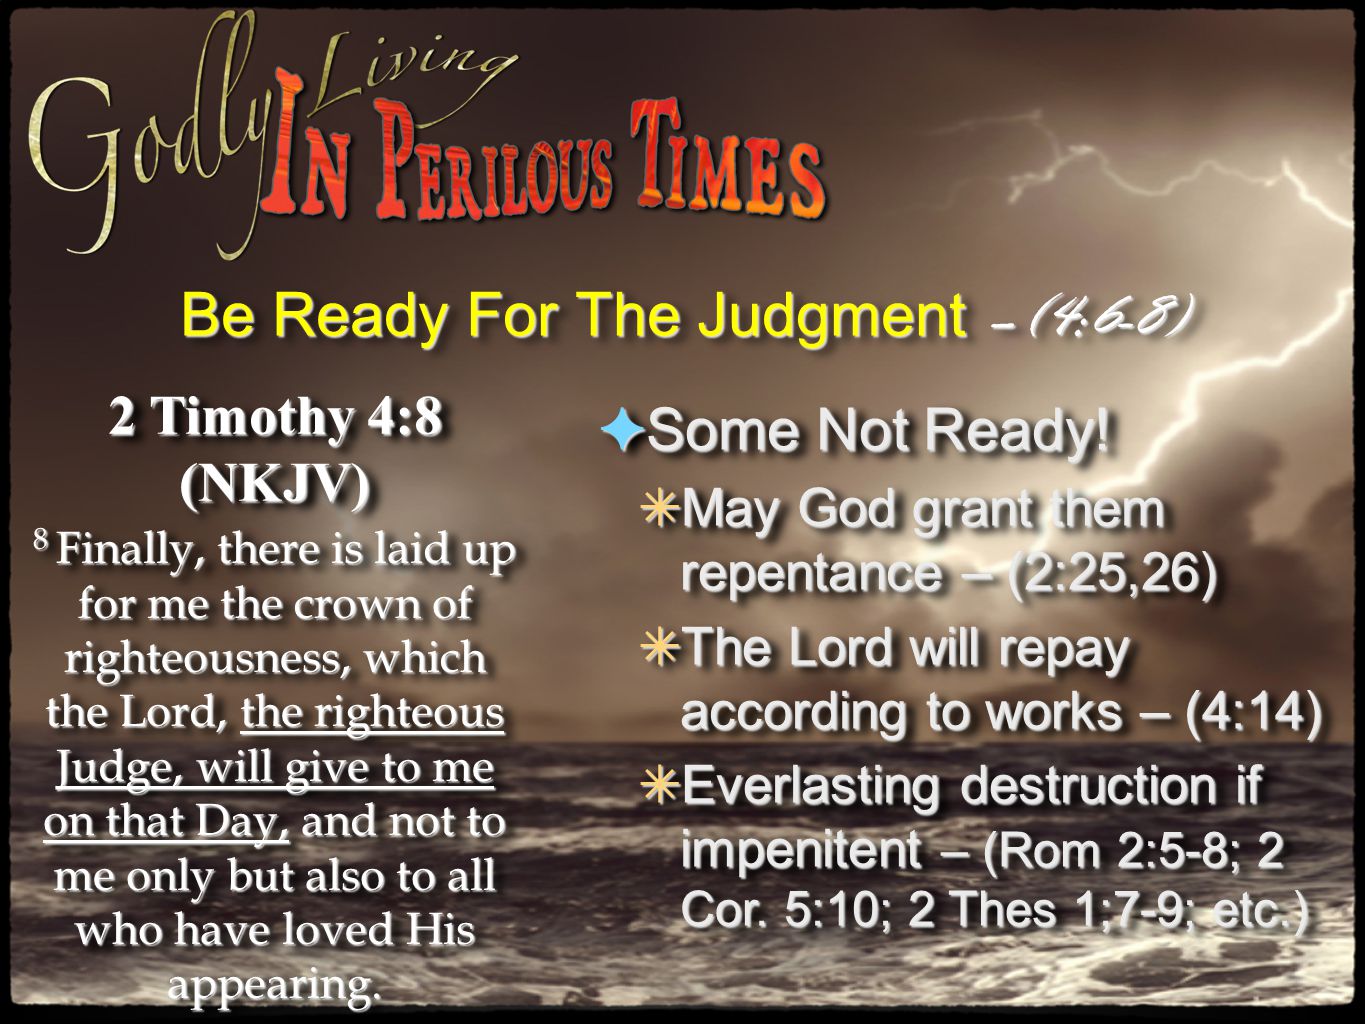 Be Ready For The Judgment –(4:6-8) 2 Timothy 4:8 (NKJV) 8 Finally, there is laid up for me the crown of righteousness, which the Lord, the righteous Judge, will give to me on that Day, and not to me only but also to all who have loved His appearing.